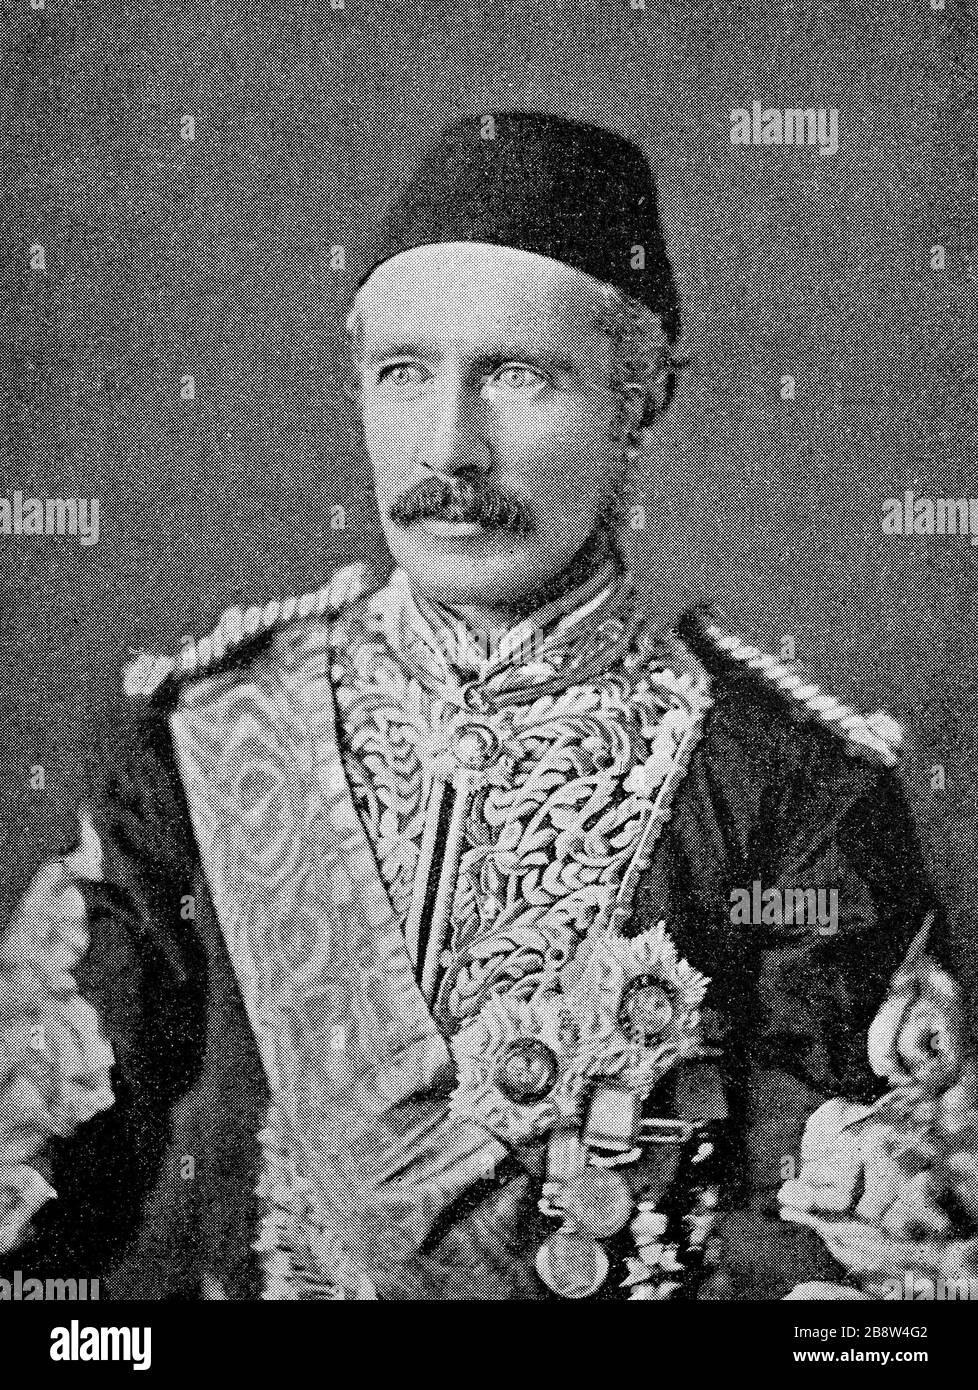 Charles George Gordon, also Chinese Gordon, Gordon Pasha and Gordon of Khartoum, January 28, 1833 - January 26, 1885, was a British Major General and Governor General of the Egyptian province of Sudan  /  Charles George Gordon, auch Chinese Gordon, Gordon Pascha und Gordon von Khartum, 28. Januar 1833 - 26. Januar 1885, war ein britischer Major-General und Generalgouverneur der ägyptischen Provinz Sudan, Historisch, digital improved reproduction of an original from the 19th century / digitale Reproduktion einer Originalvorlage aus dem 19. Jahrhundert, Stock Photo